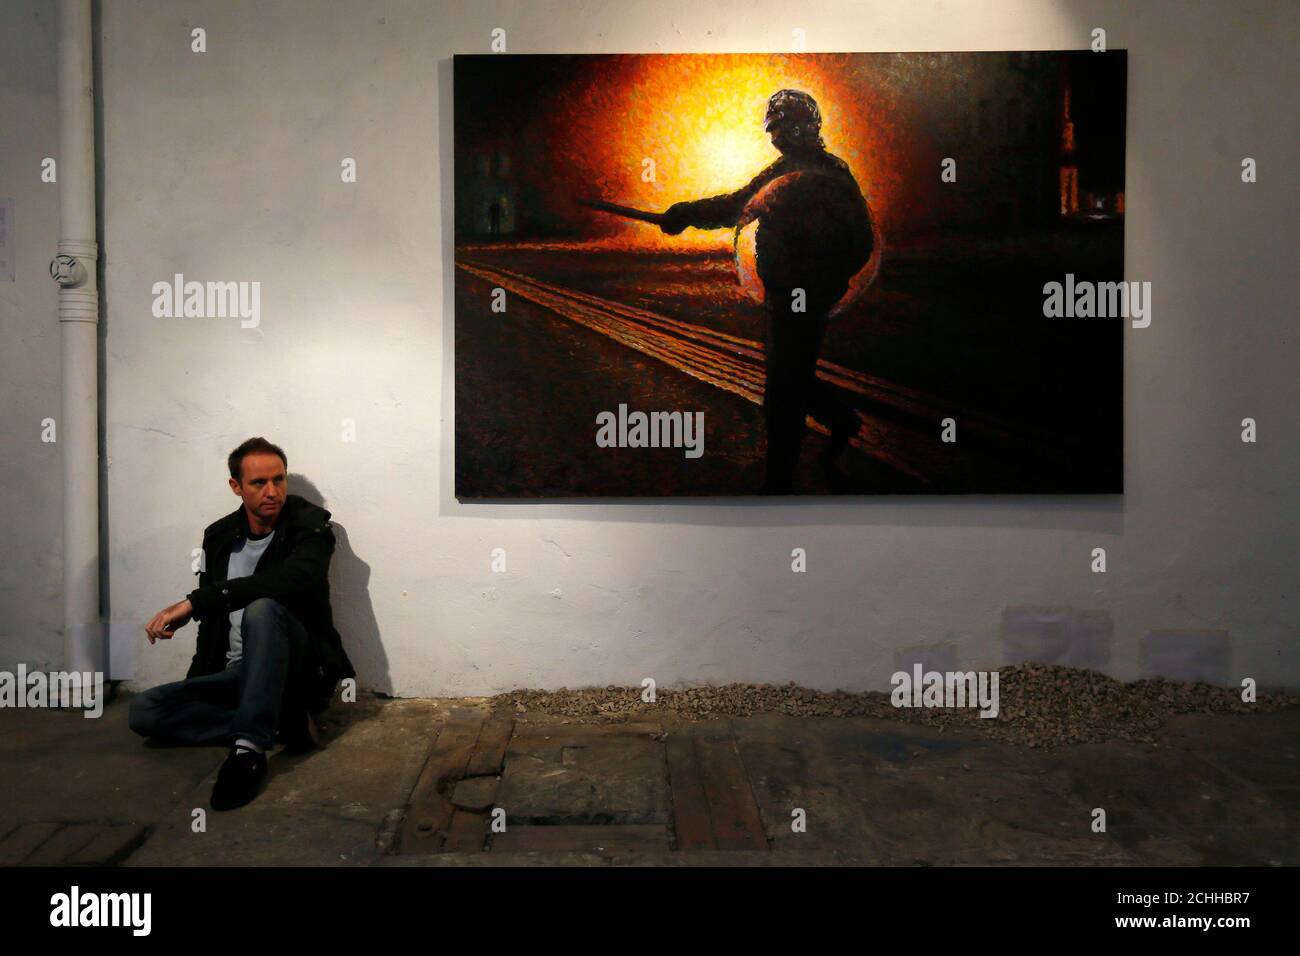 Street artist James Cochran, also known as Jimmy C, poses next to his spray painted picture 'Defy' at the Pure Evil Gallery in London October 10, 2013. The paintings were originally inspired by the London riots in 2011. REUTERS/Stefan Wermuth (BRITAIN - Tags: ENTERTAINMENT SOCIETY) Stock Photo